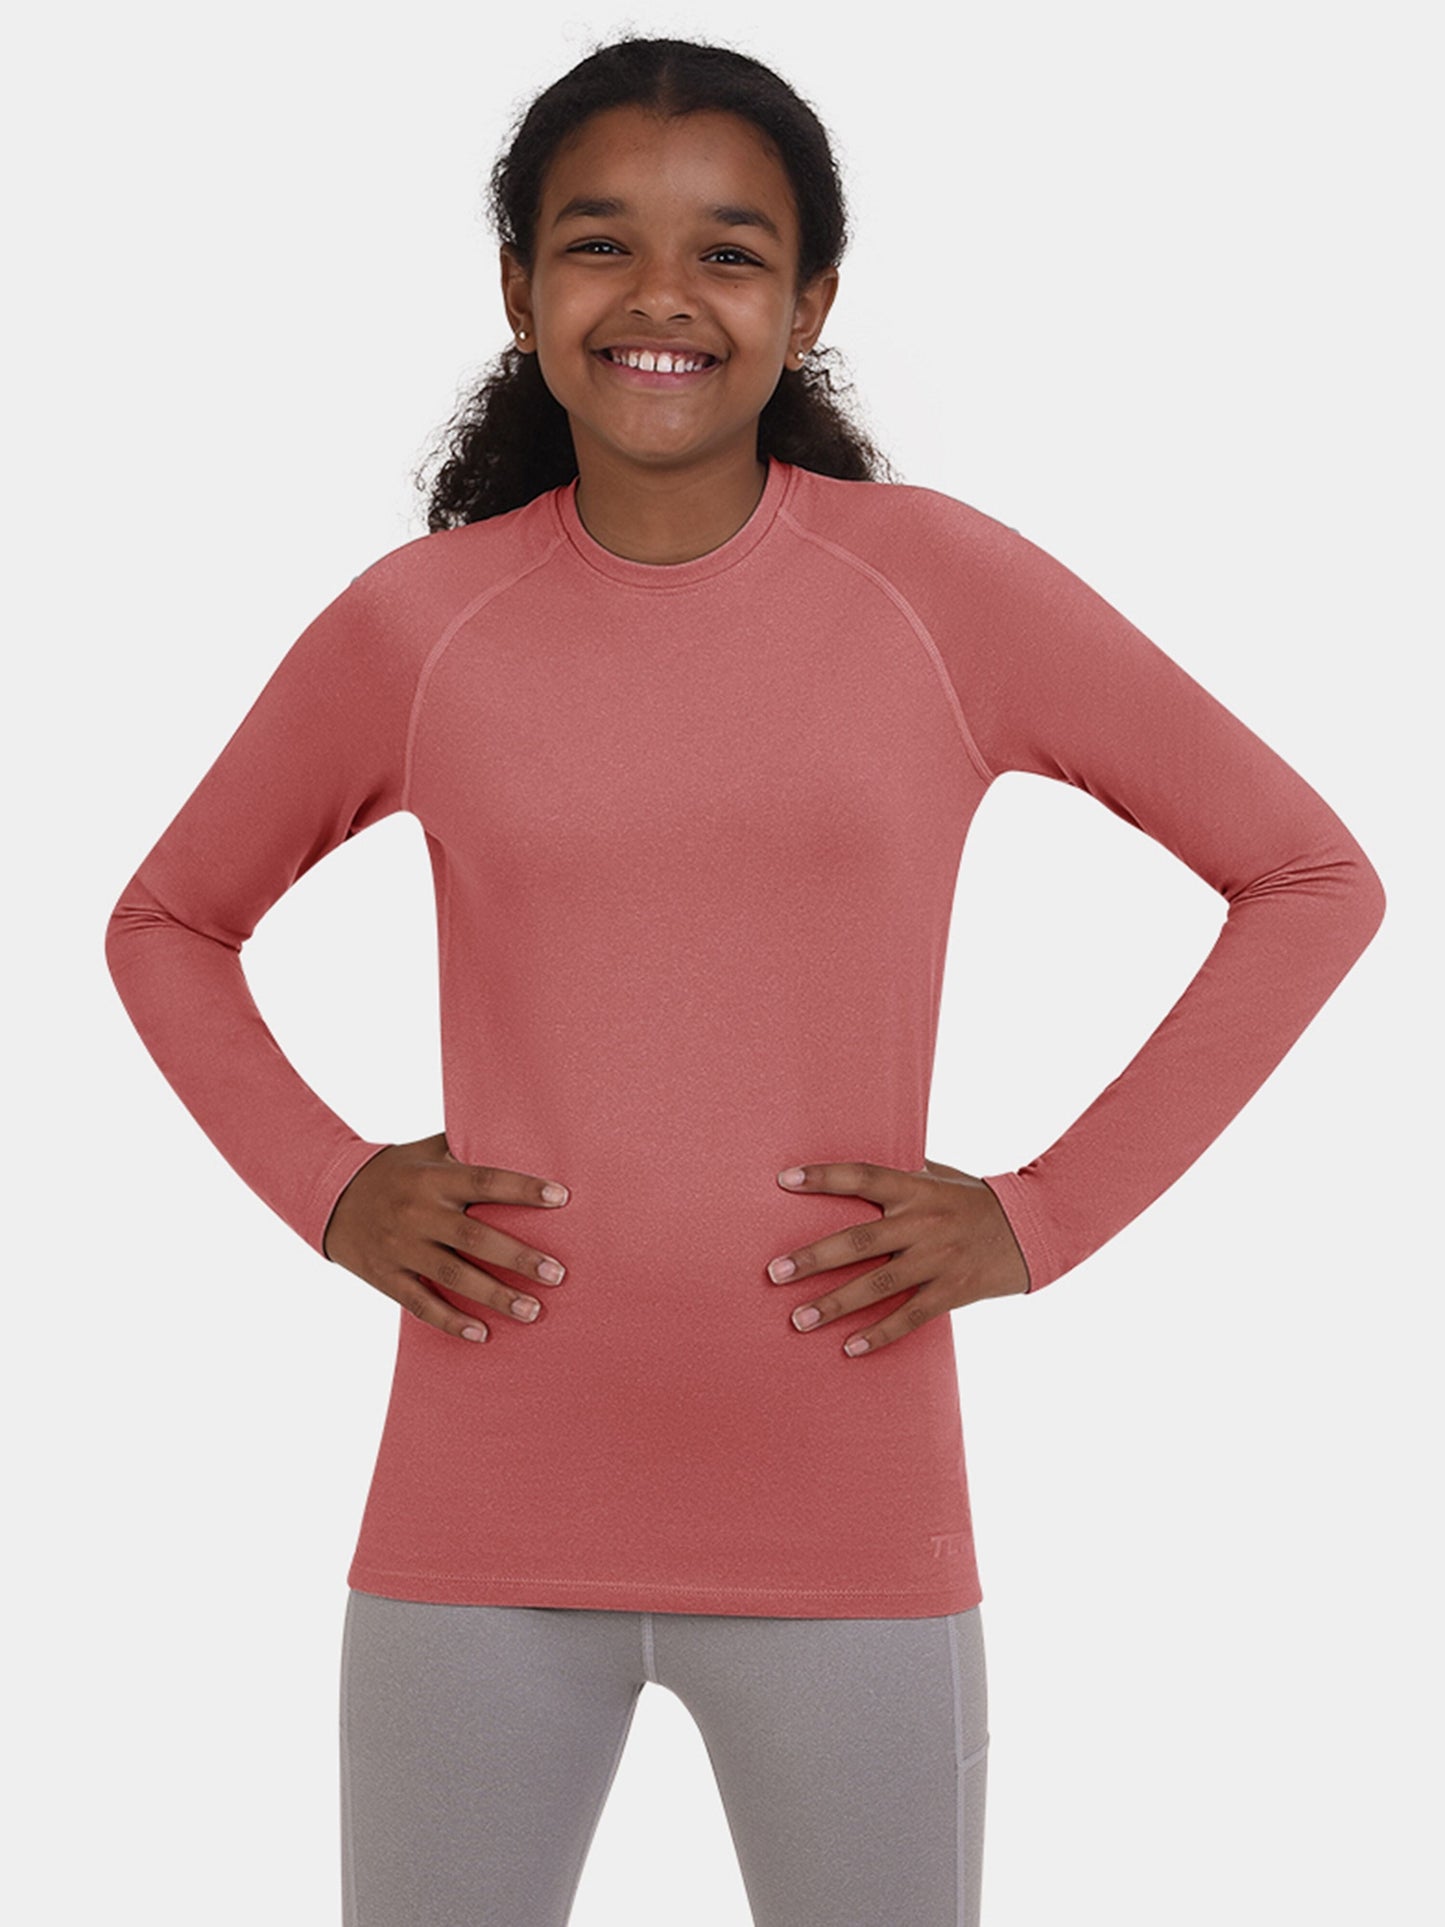 SuperThermal Compression Base Layer Top & Tights for Girls With Brushed Inner Fabric